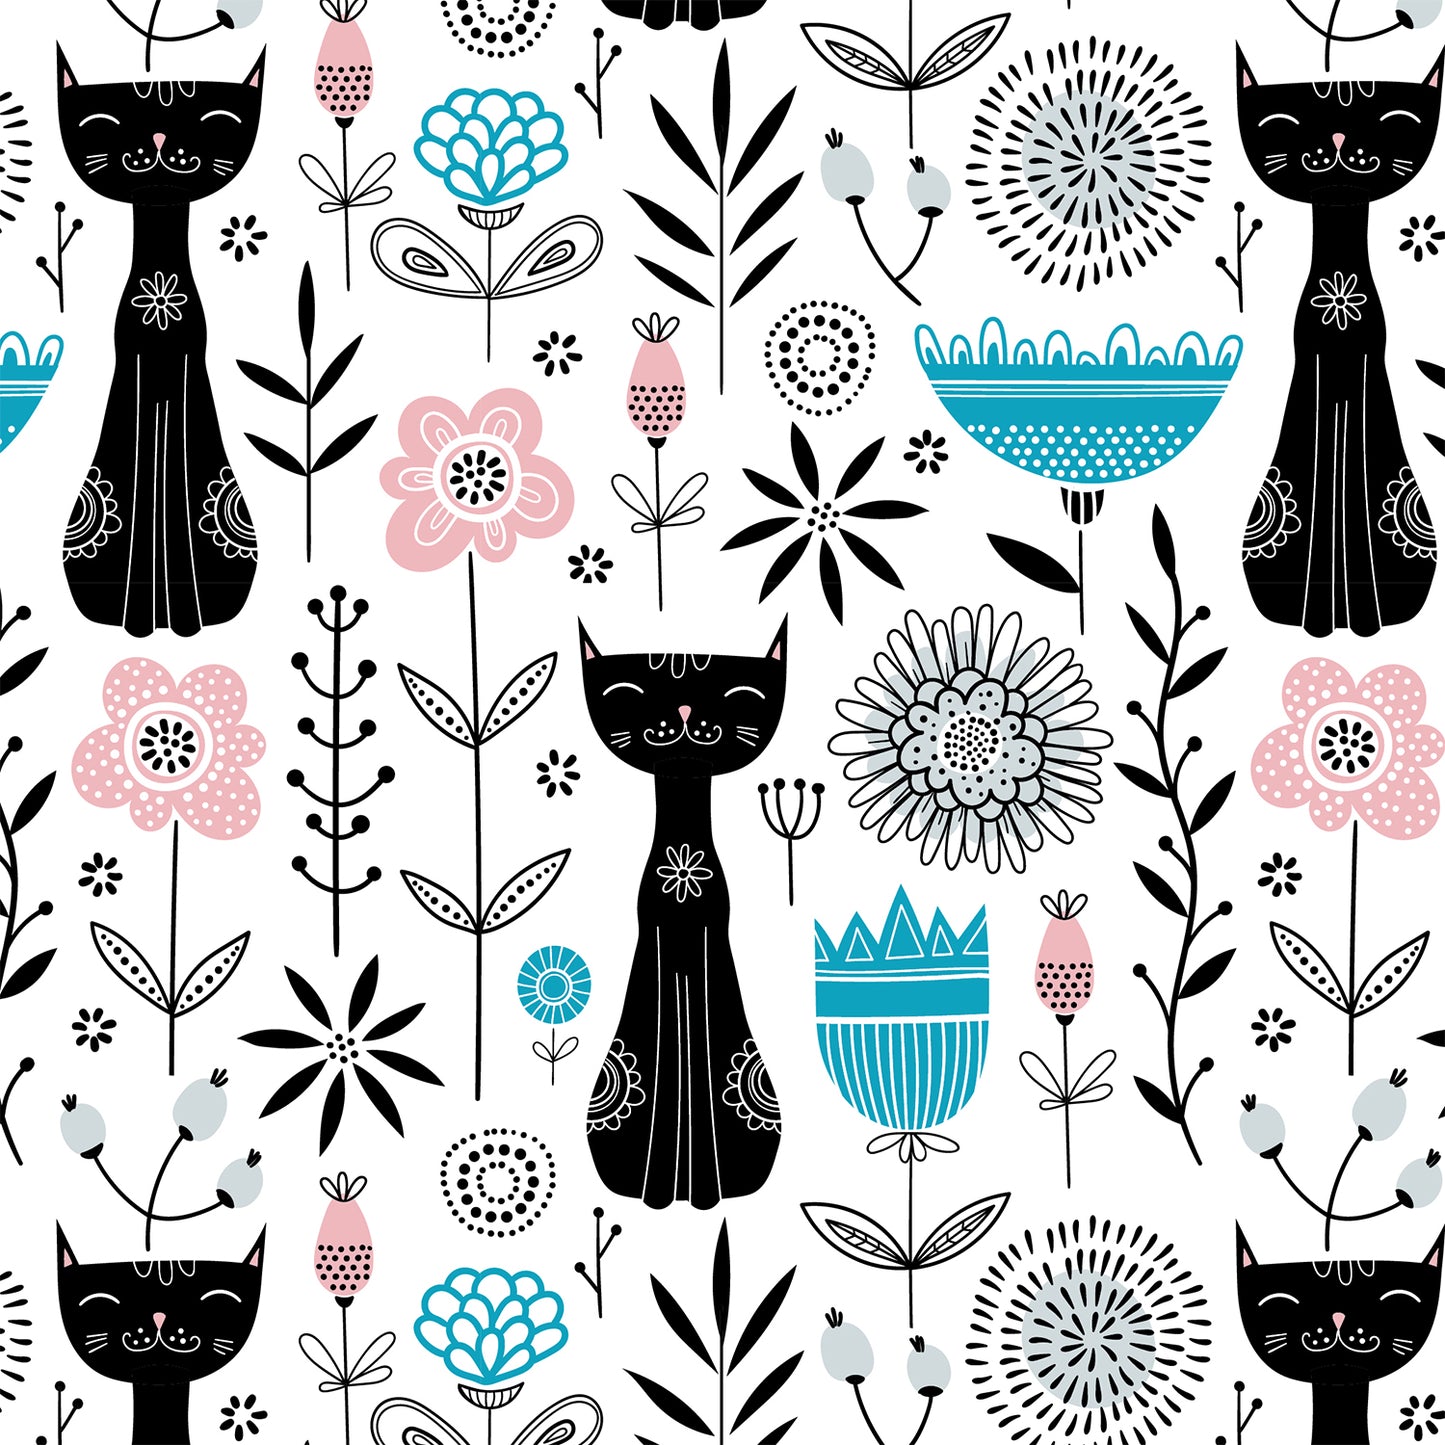 Sketch Cats in Flower Flat Wrapping Paper Sheet Wholesale Wraphaholic